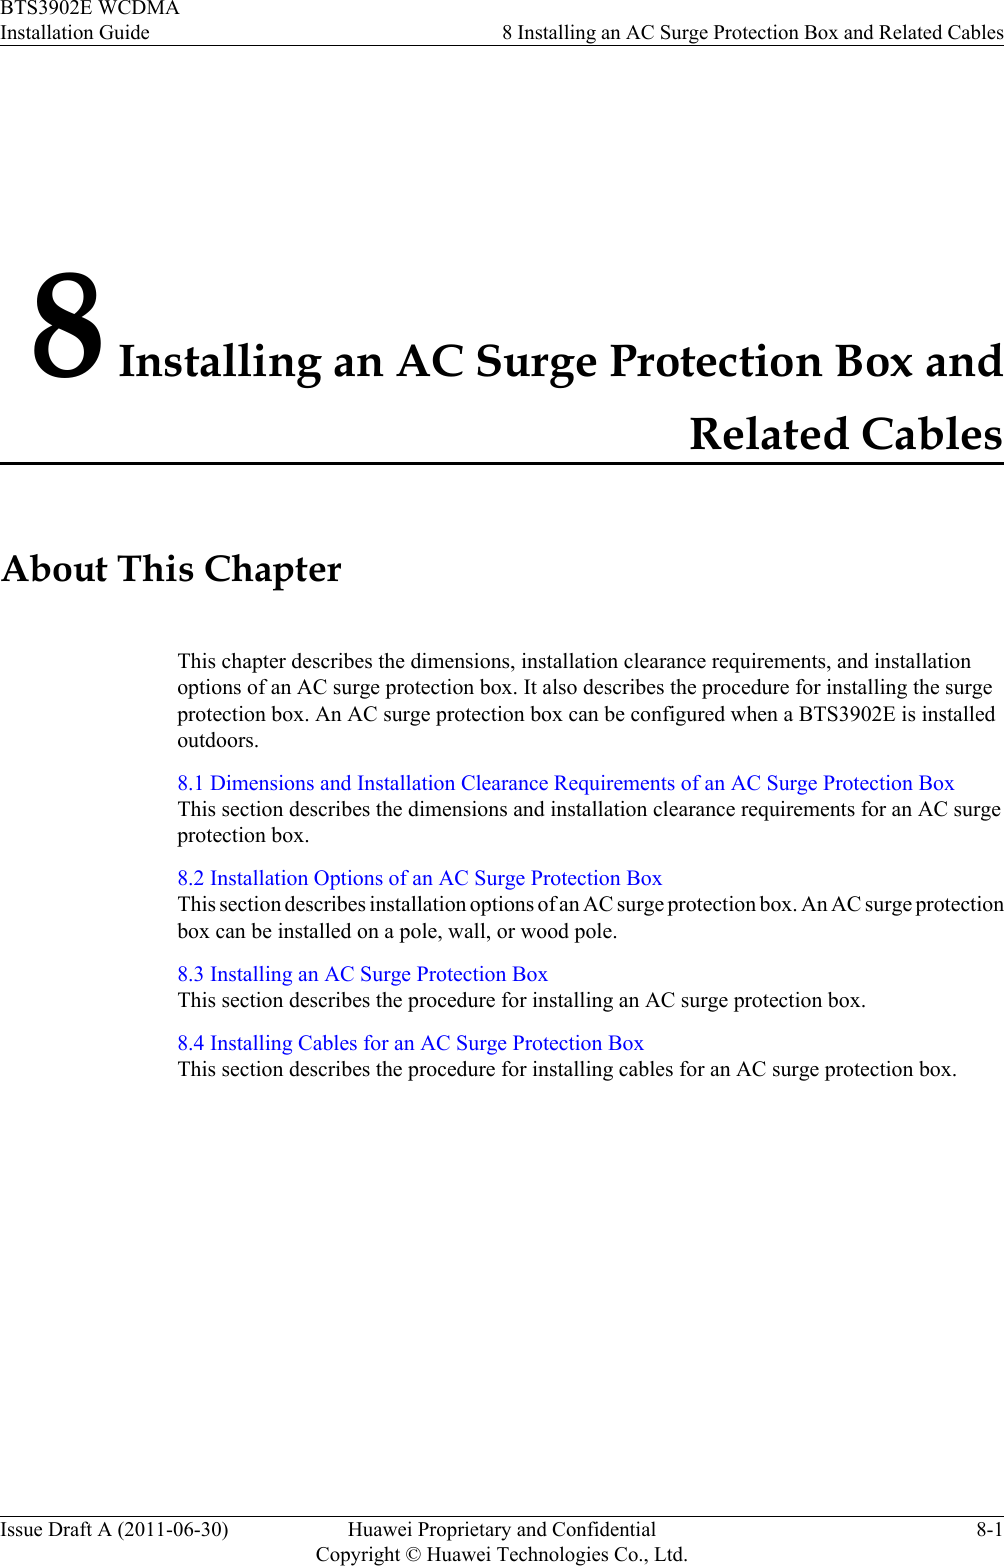 8 Installing an AC Surge Protection Box andRelated CablesAbout This ChapterThis chapter describes the dimensions, installation clearance requirements, and installationoptions of an AC surge protection box. It also describes the procedure for installing the surgeprotection box. An AC surge protection box can be configured when a BTS3902E is installedoutdoors.8.1 Dimensions and Installation Clearance Requirements of an AC Surge Protection BoxThis section describes the dimensions and installation clearance requirements for an AC surgeprotection box.8.2 Installation Options of an AC Surge Protection BoxThis section describes installation options of an AC surge protection box. An AC surge protectionbox can be installed on a pole, wall, or wood pole.8.3 Installing an AC Surge Protection BoxThis section describes the procedure for installing an AC surge protection box.8.4 Installing Cables for an AC Surge Protection BoxThis section describes the procedure for installing cables for an AC surge protection box.BTS3902E WCDMAInstallation Guide 8 Installing an AC Surge Protection Box and Related CablesIssue Draft A (2011-06-30) Huawei Proprietary and ConfidentialCopyright © Huawei Technologies Co., Ltd.8-1